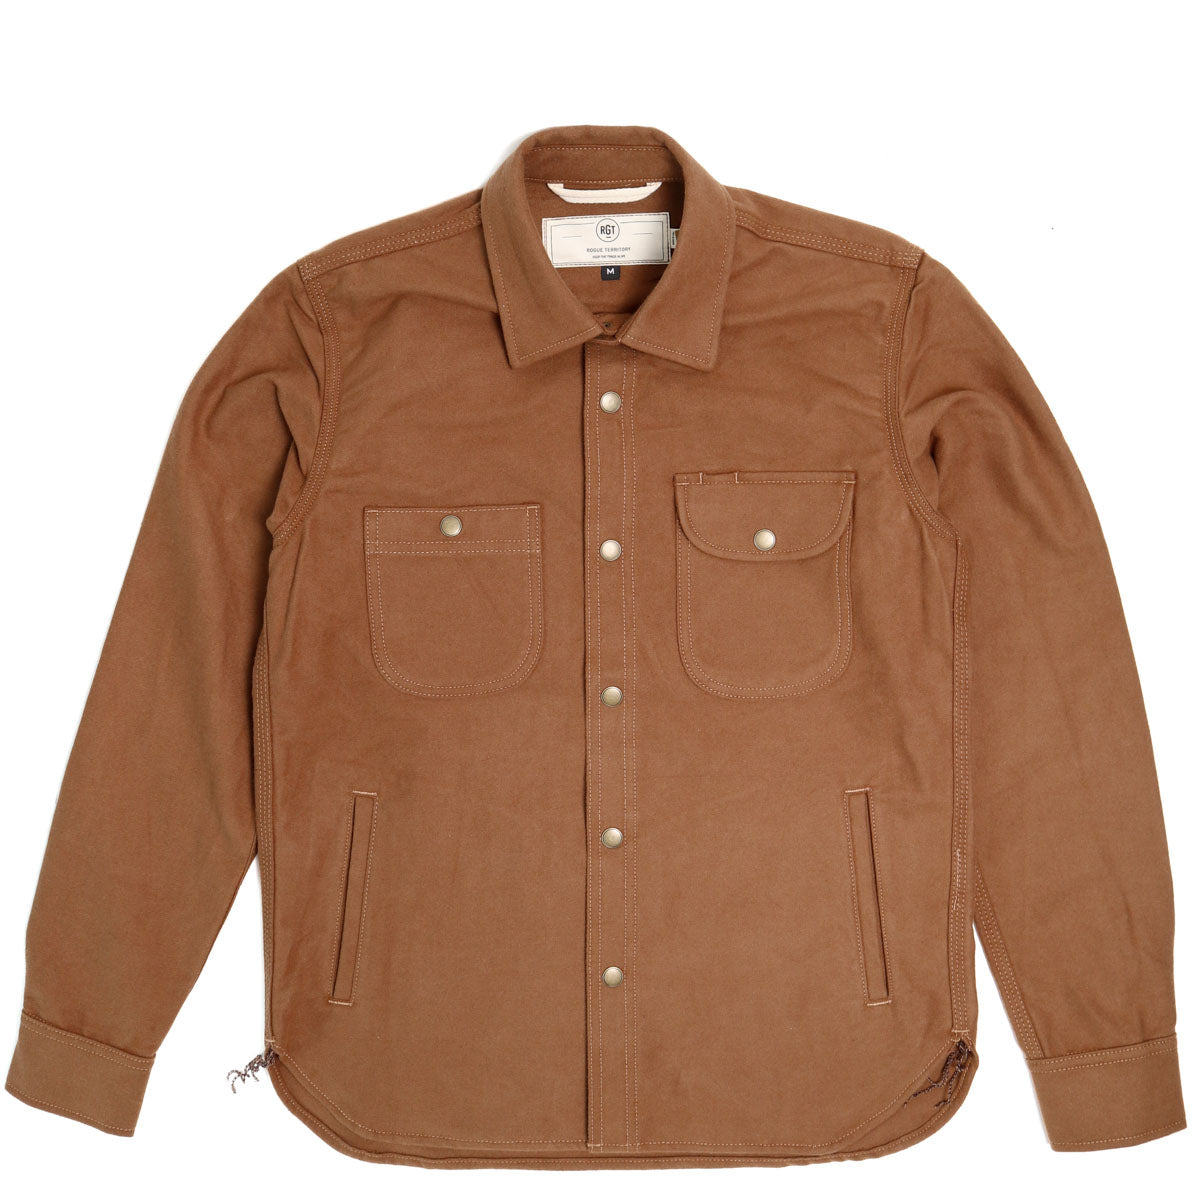 Rogue Territory Service Shirt - Copper Brushed Flannel